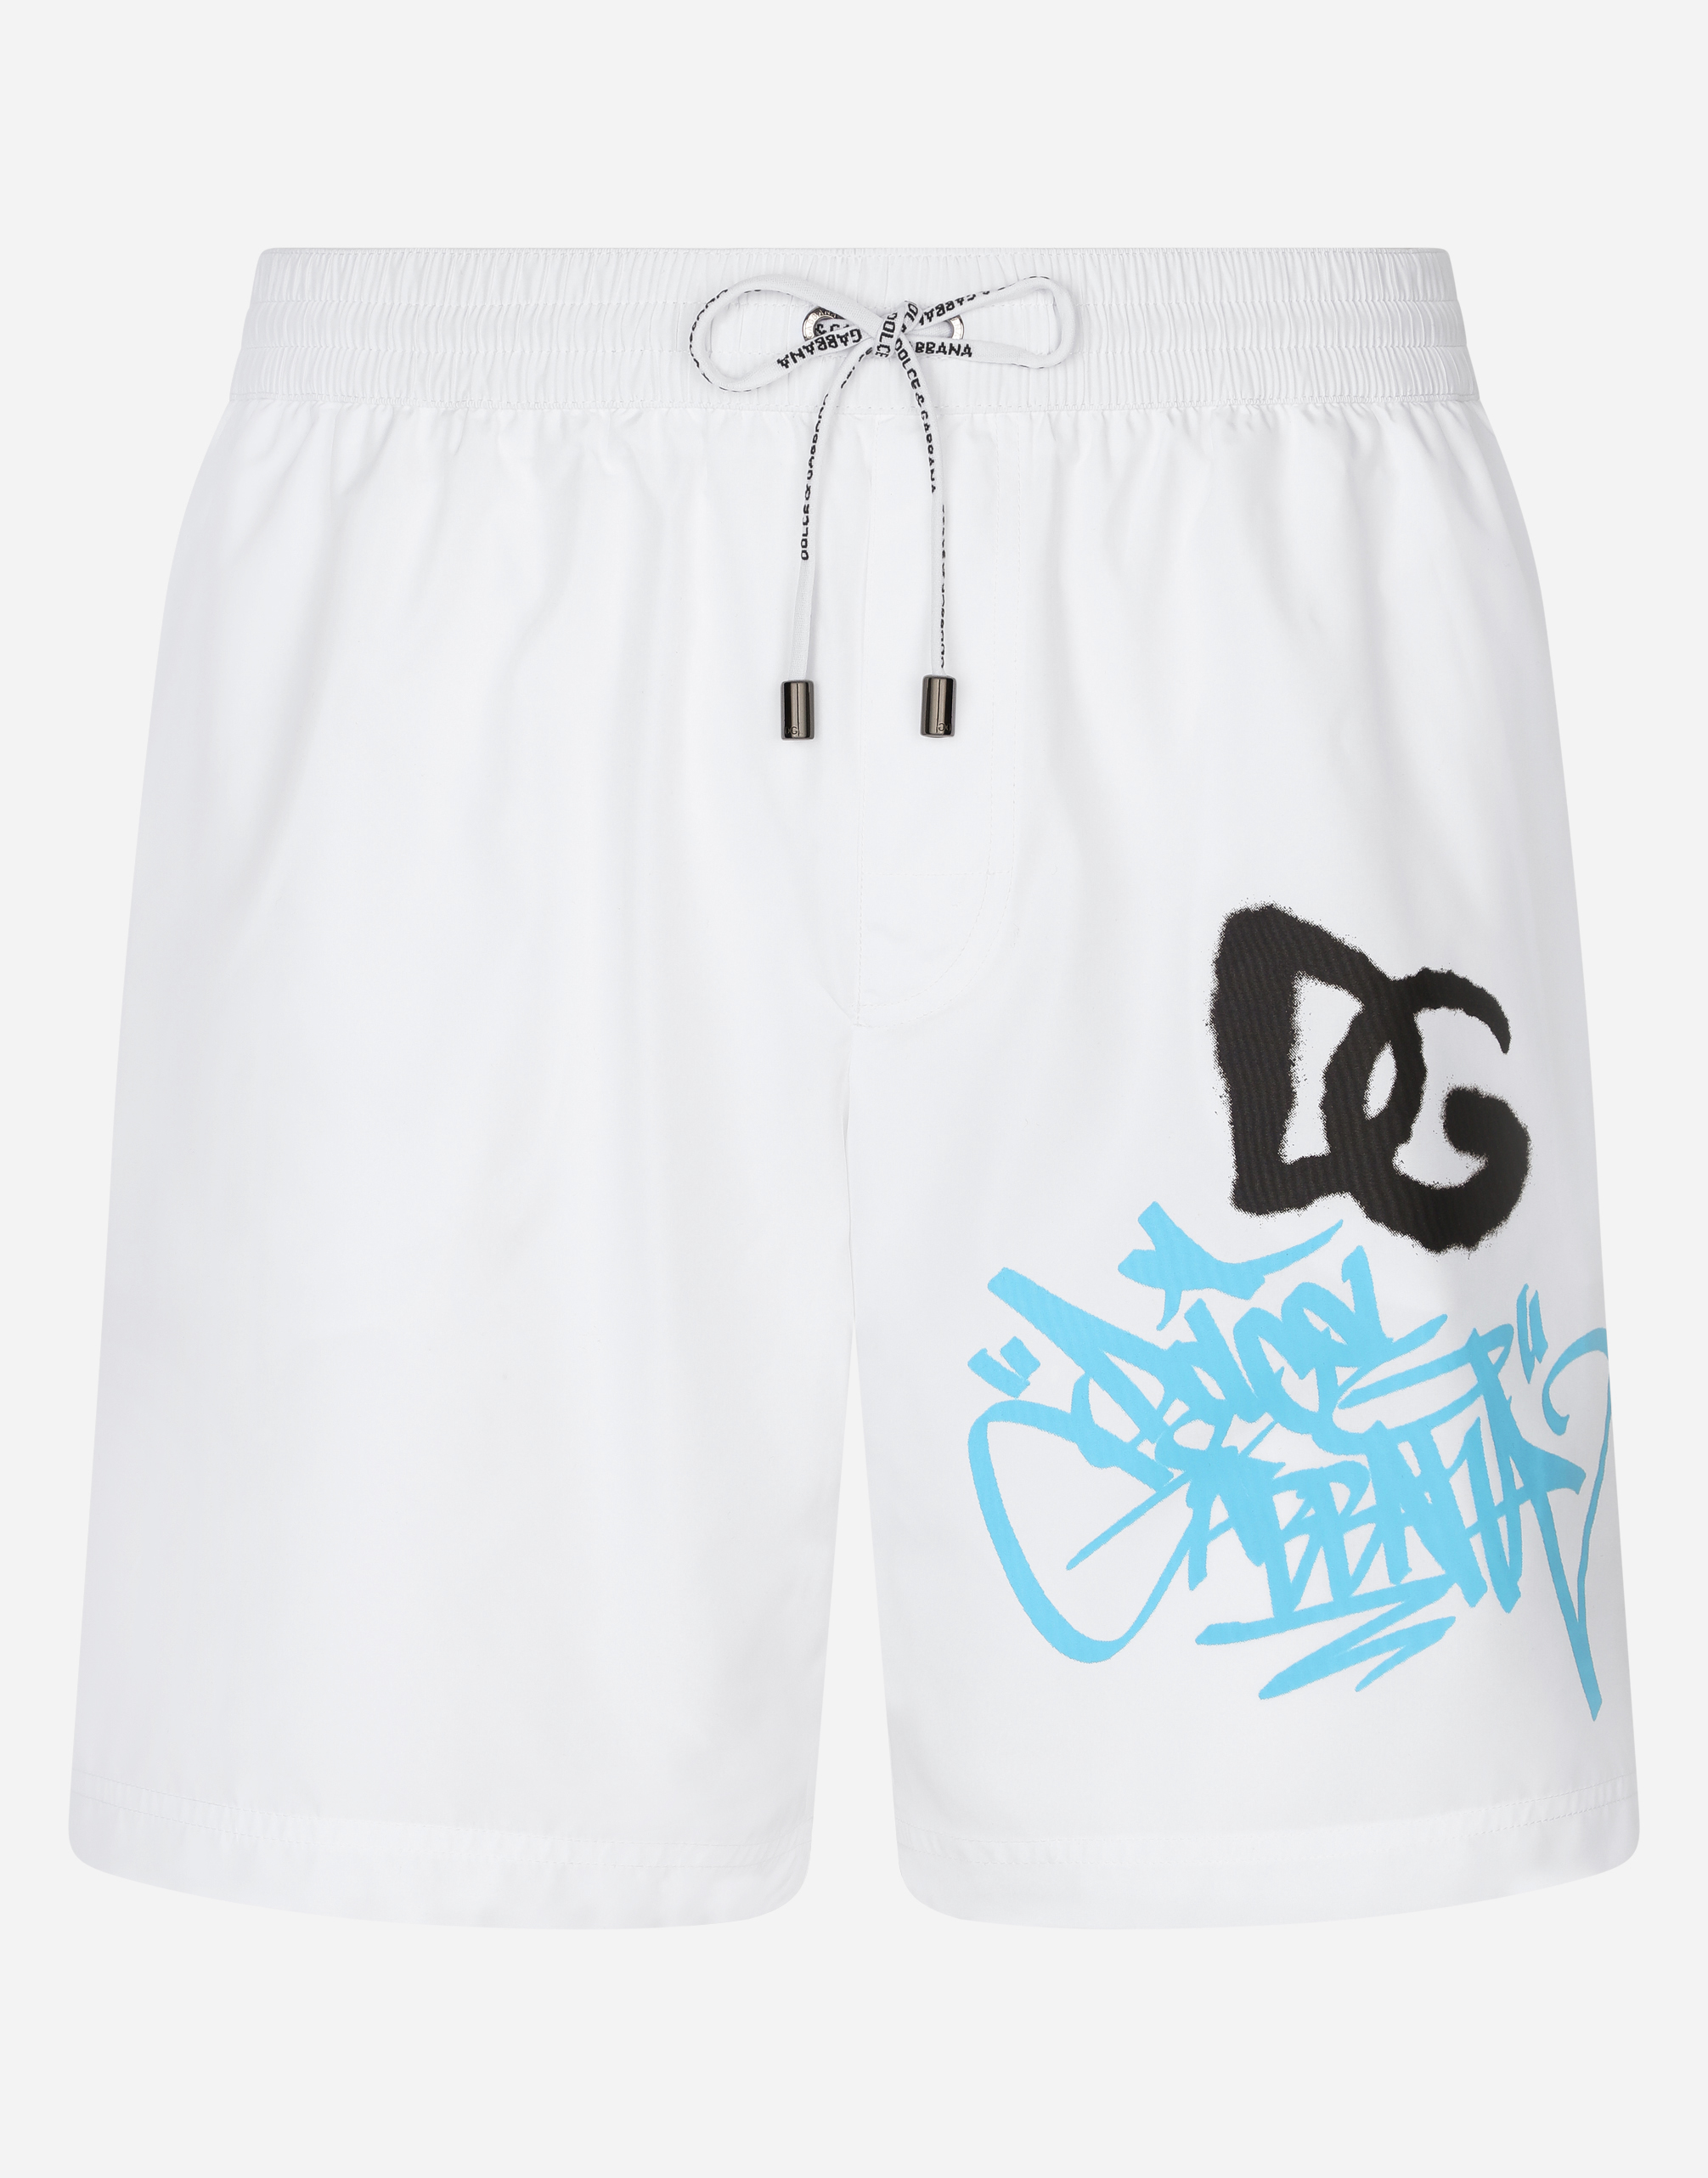 Mid-length swim trunks with spray-paint DG print in Multicolor